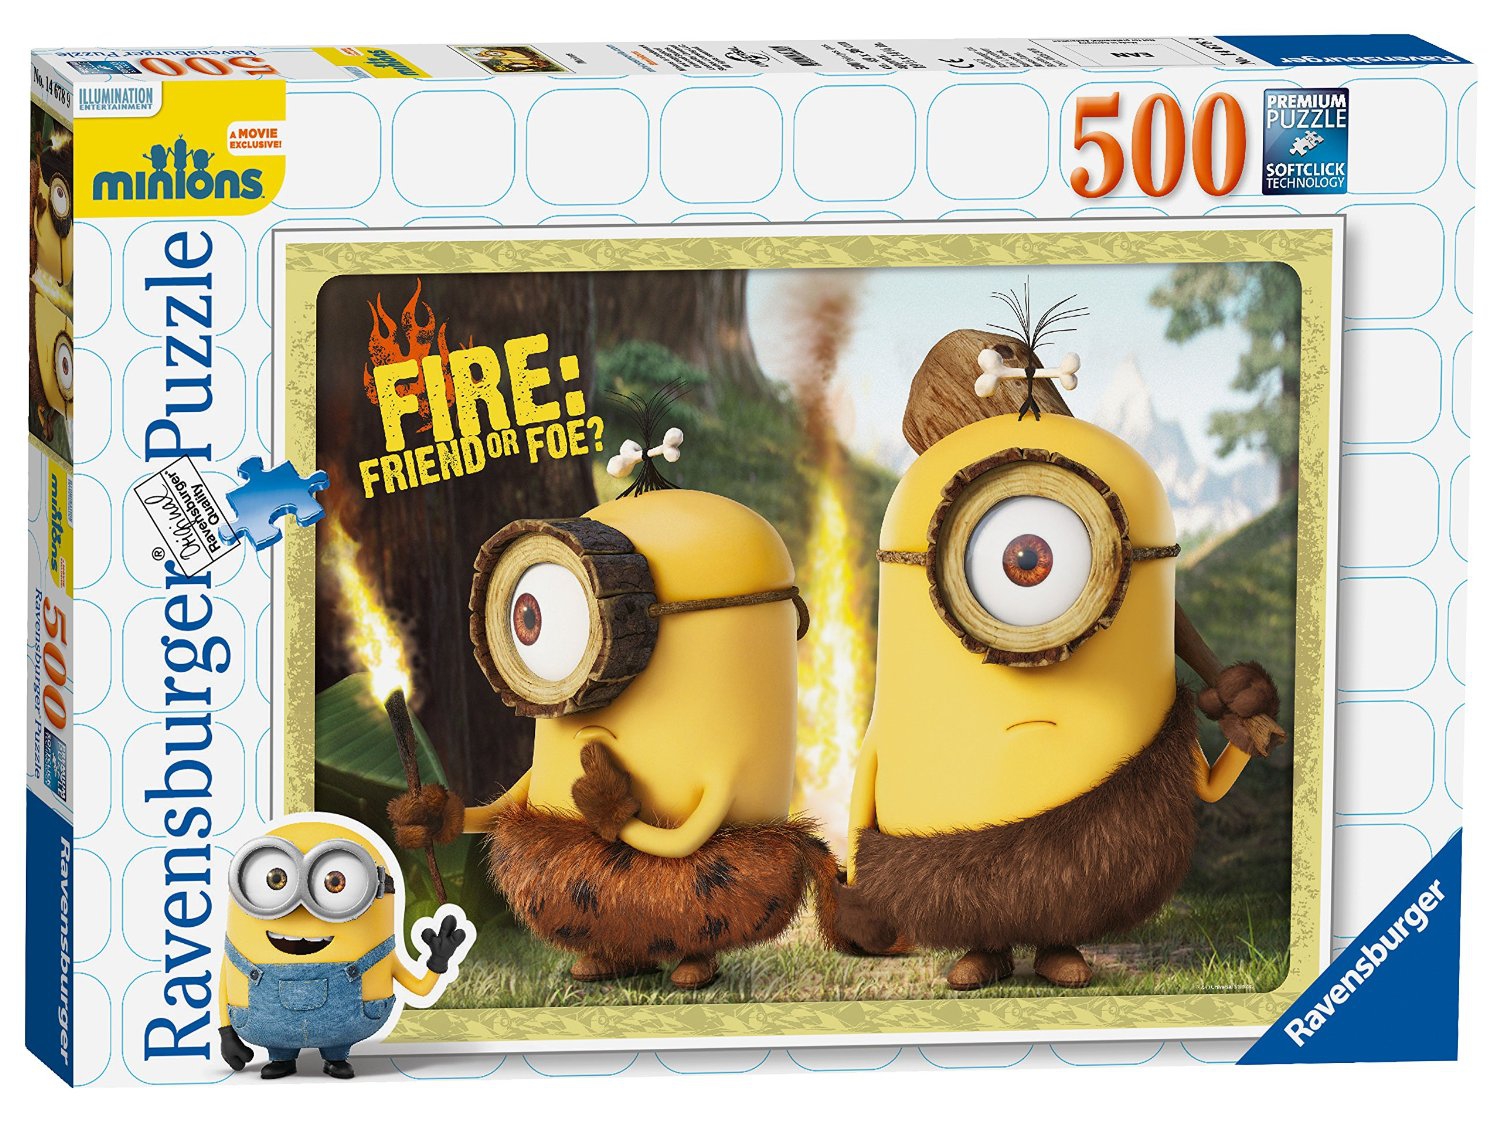 Ravensburger Minions 'Fire Friend Or Foe' 500 Piece Jigsaw Puzzle Game